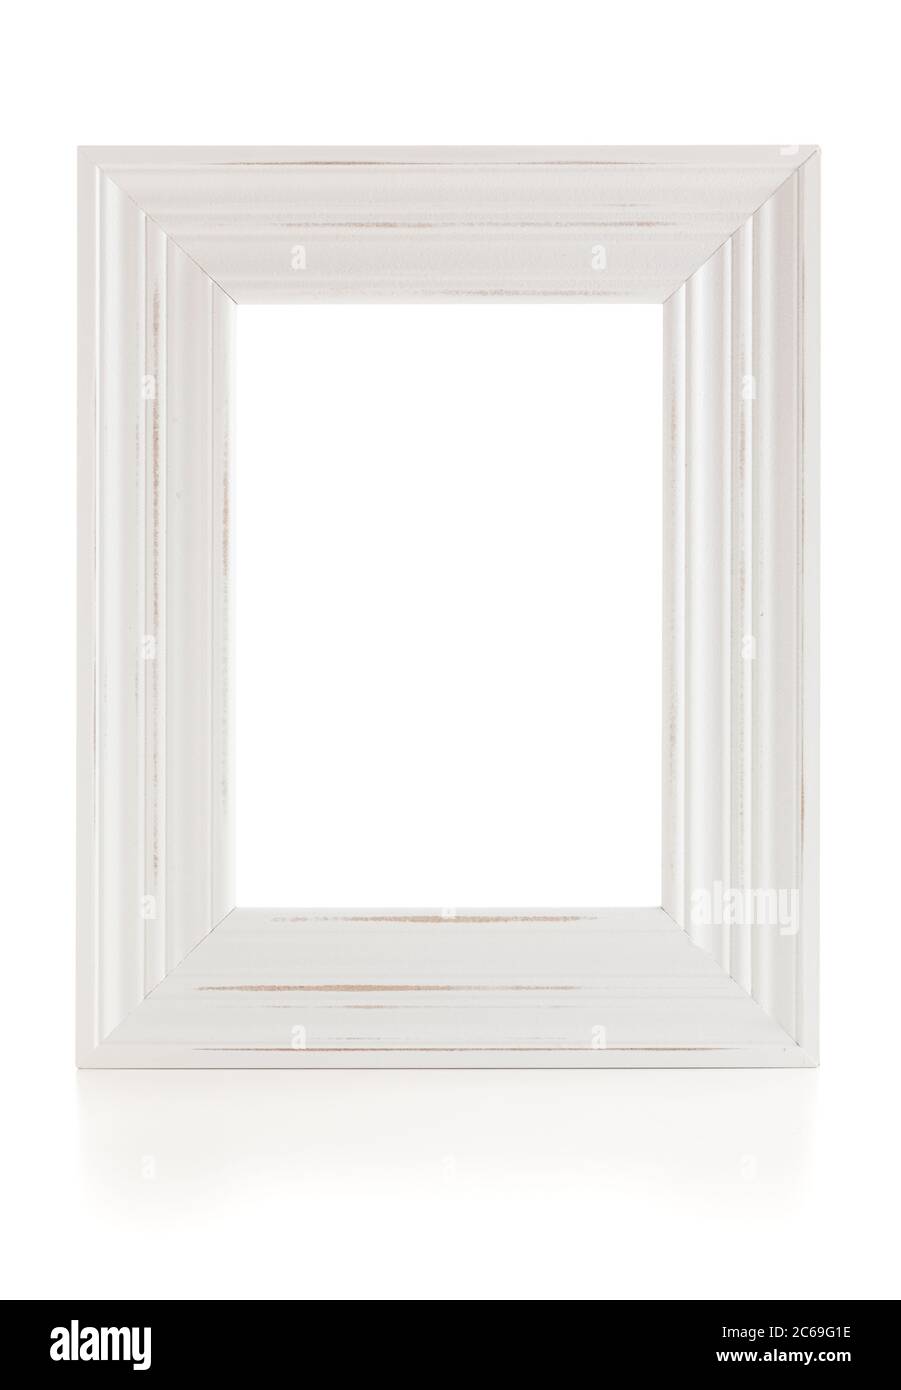 Vintage styled wooden white picture frame isolated with clipping path. Separate pathes for inside and outside of frame. Stock Photo